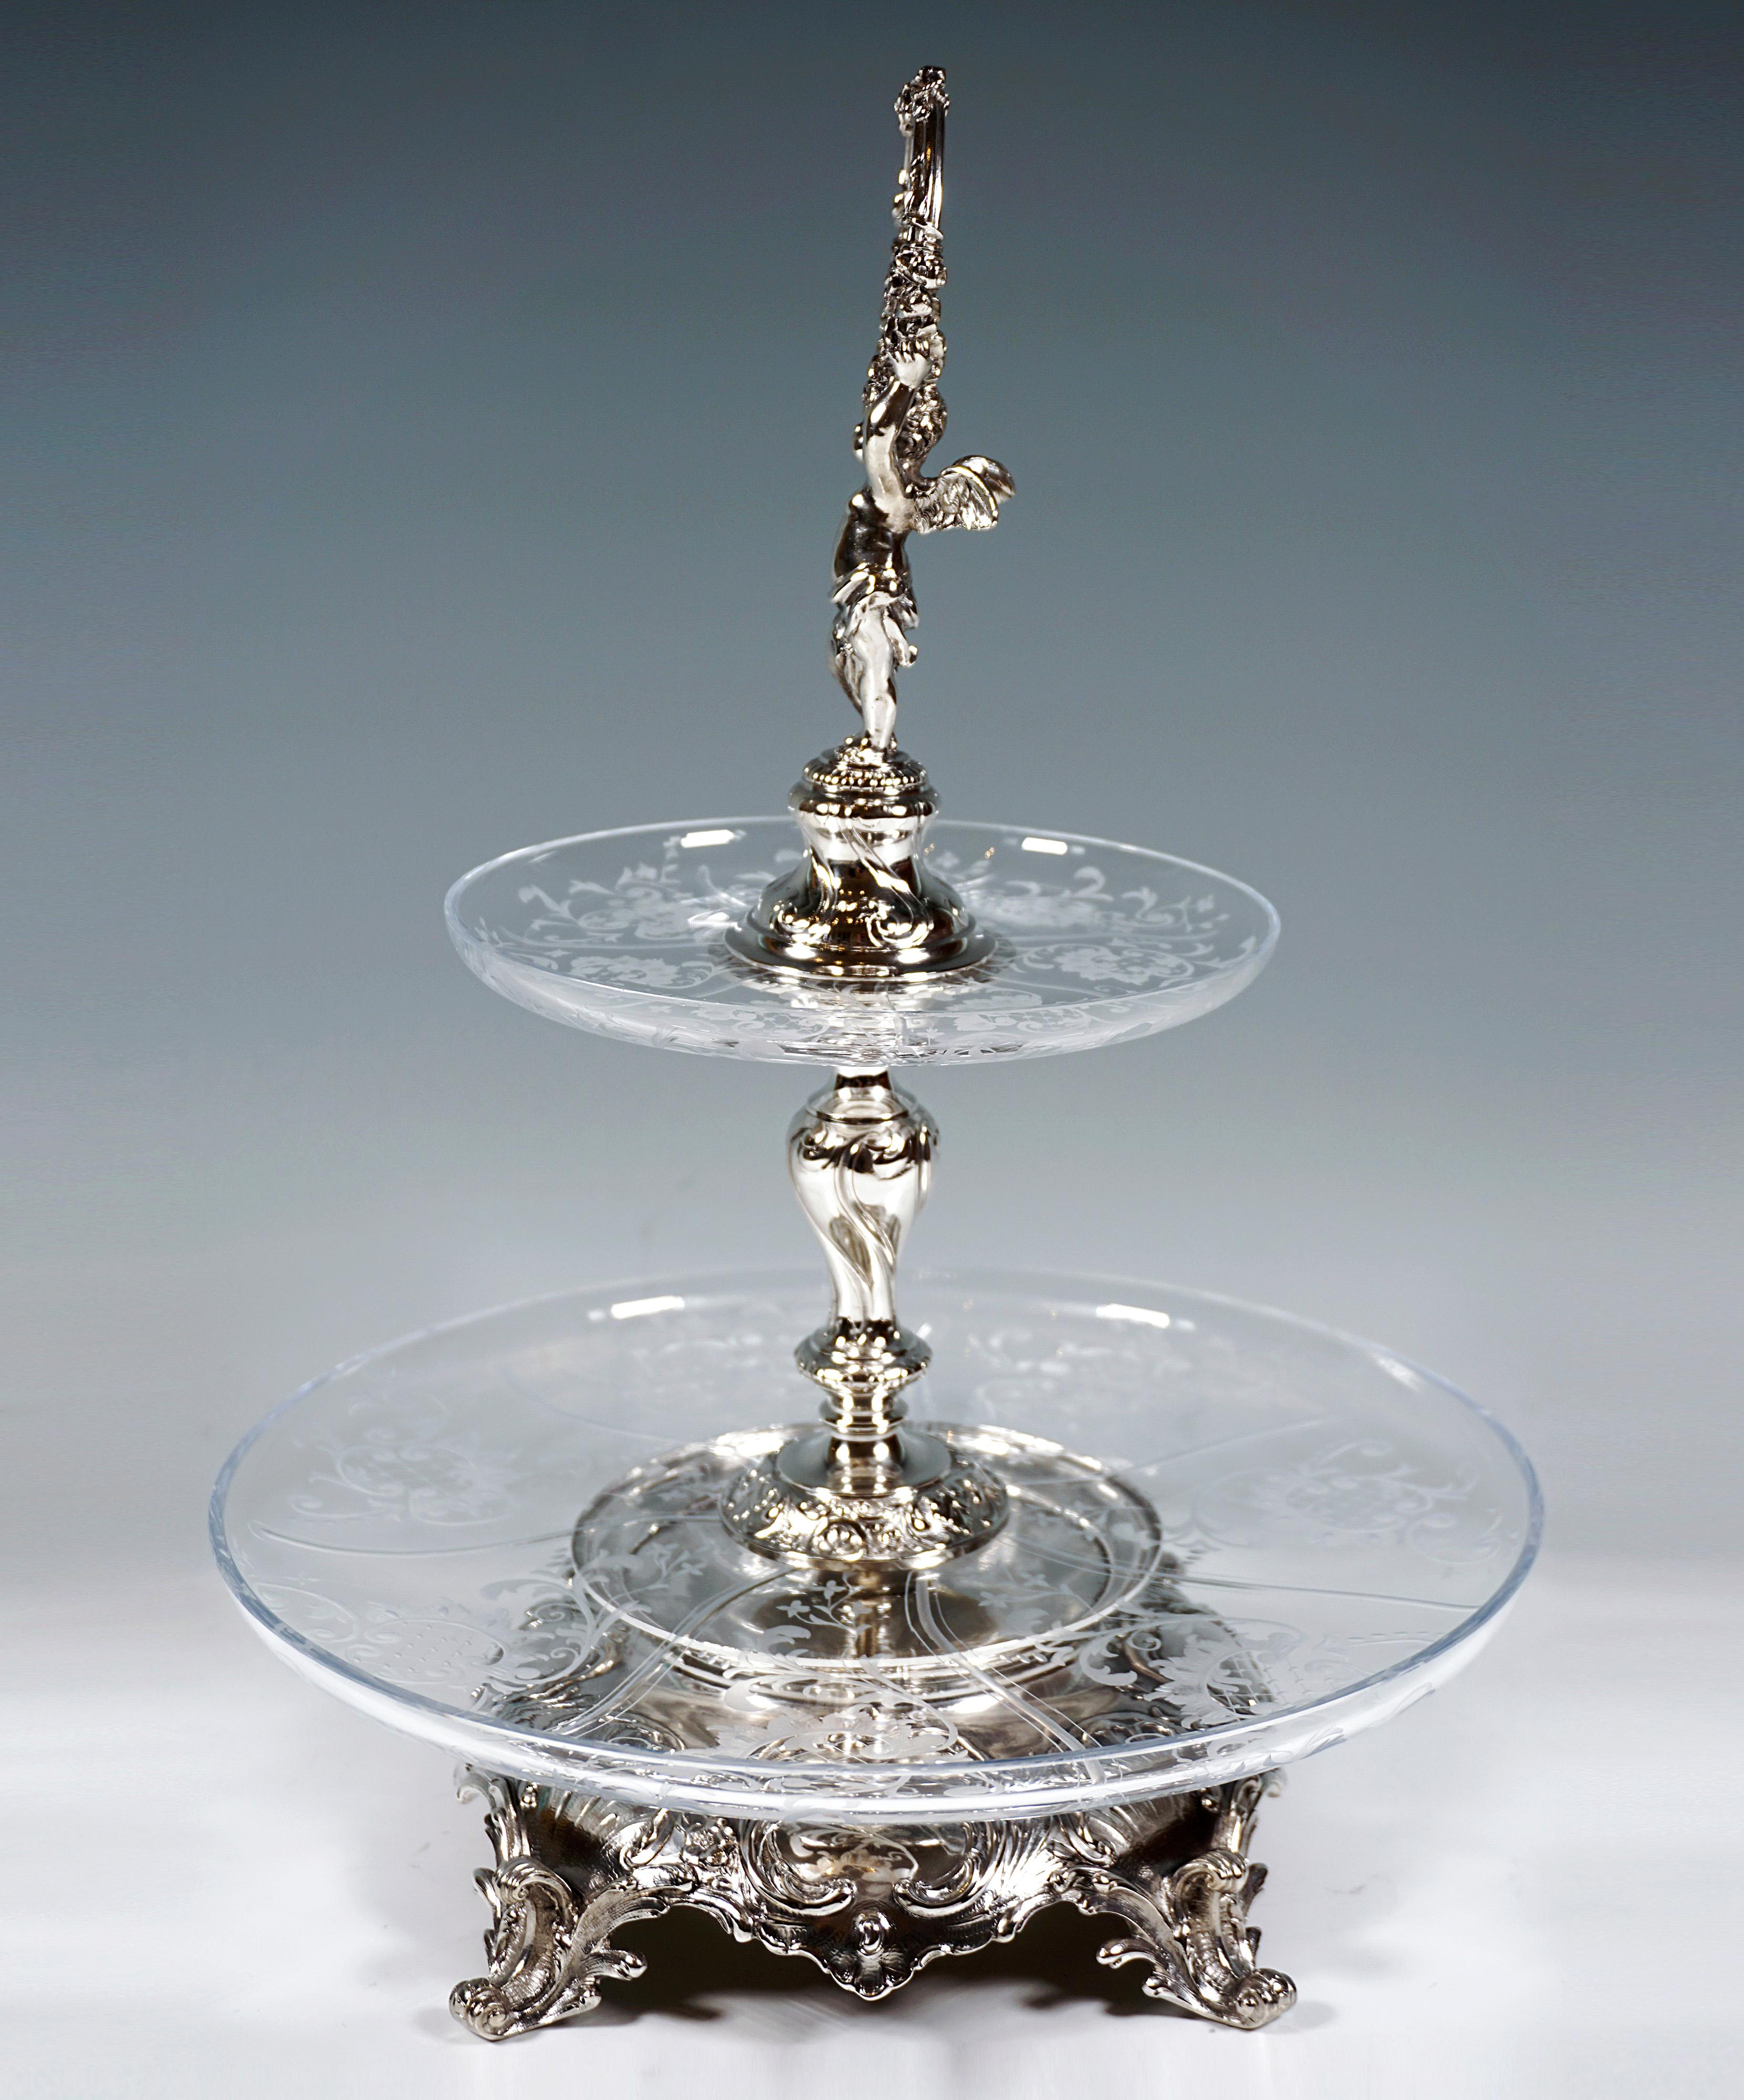 Viennese Silver & Glass Art Nouveau Table Étagère by Würbel & Szokally, Ca. 1900 In Good Condition For Sale In Vienna, AT